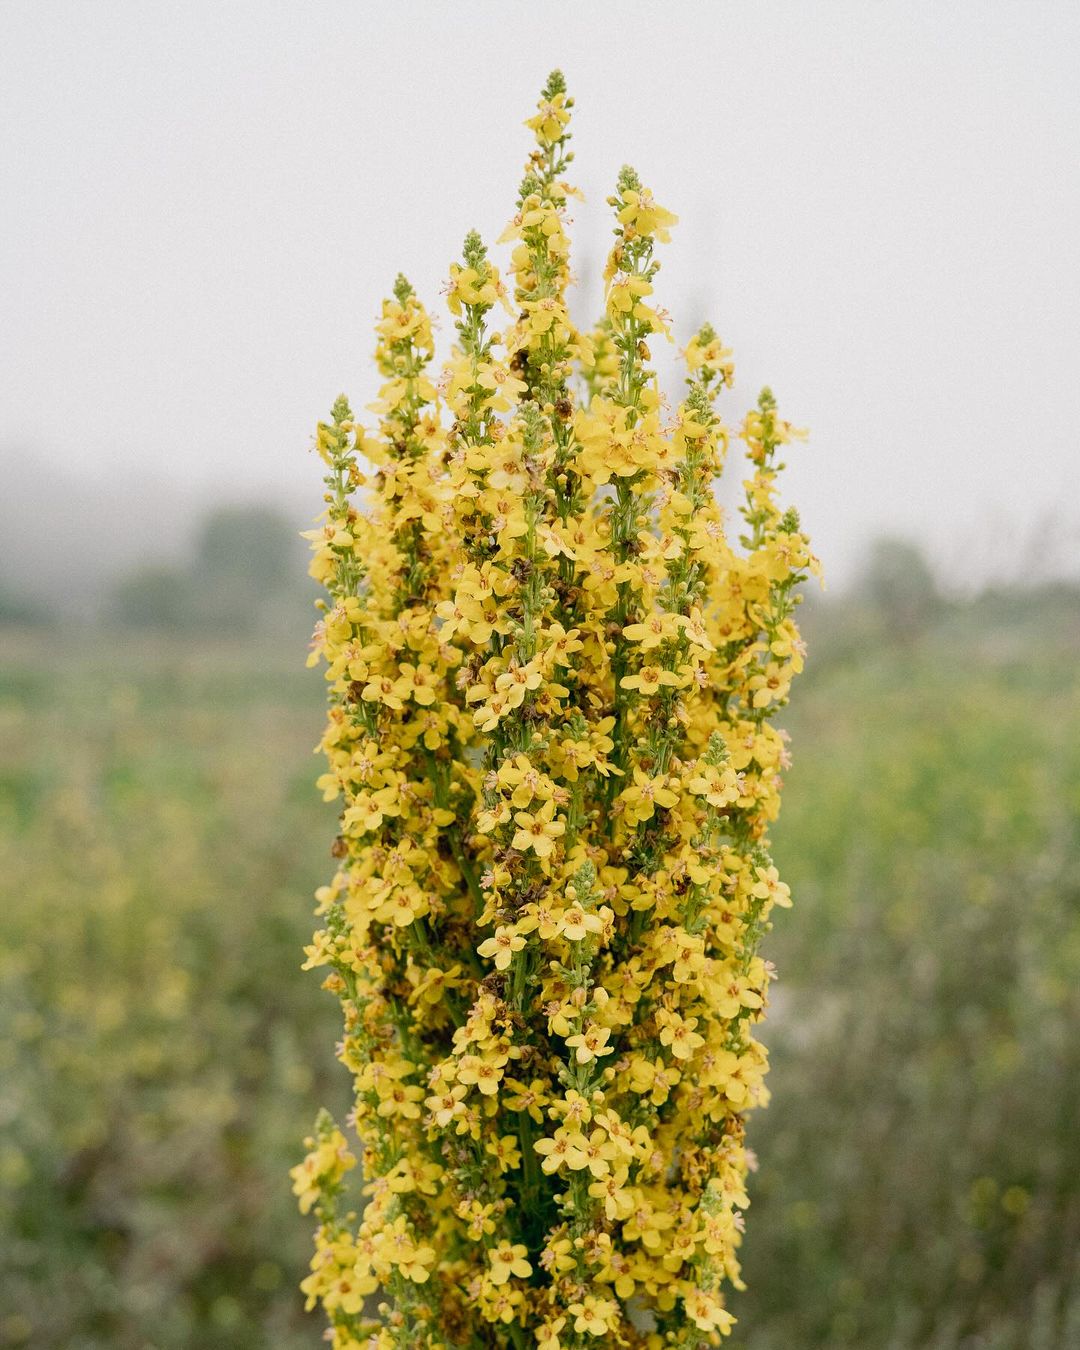  A picturesque scene of a Mullein plant with yellow blooms.